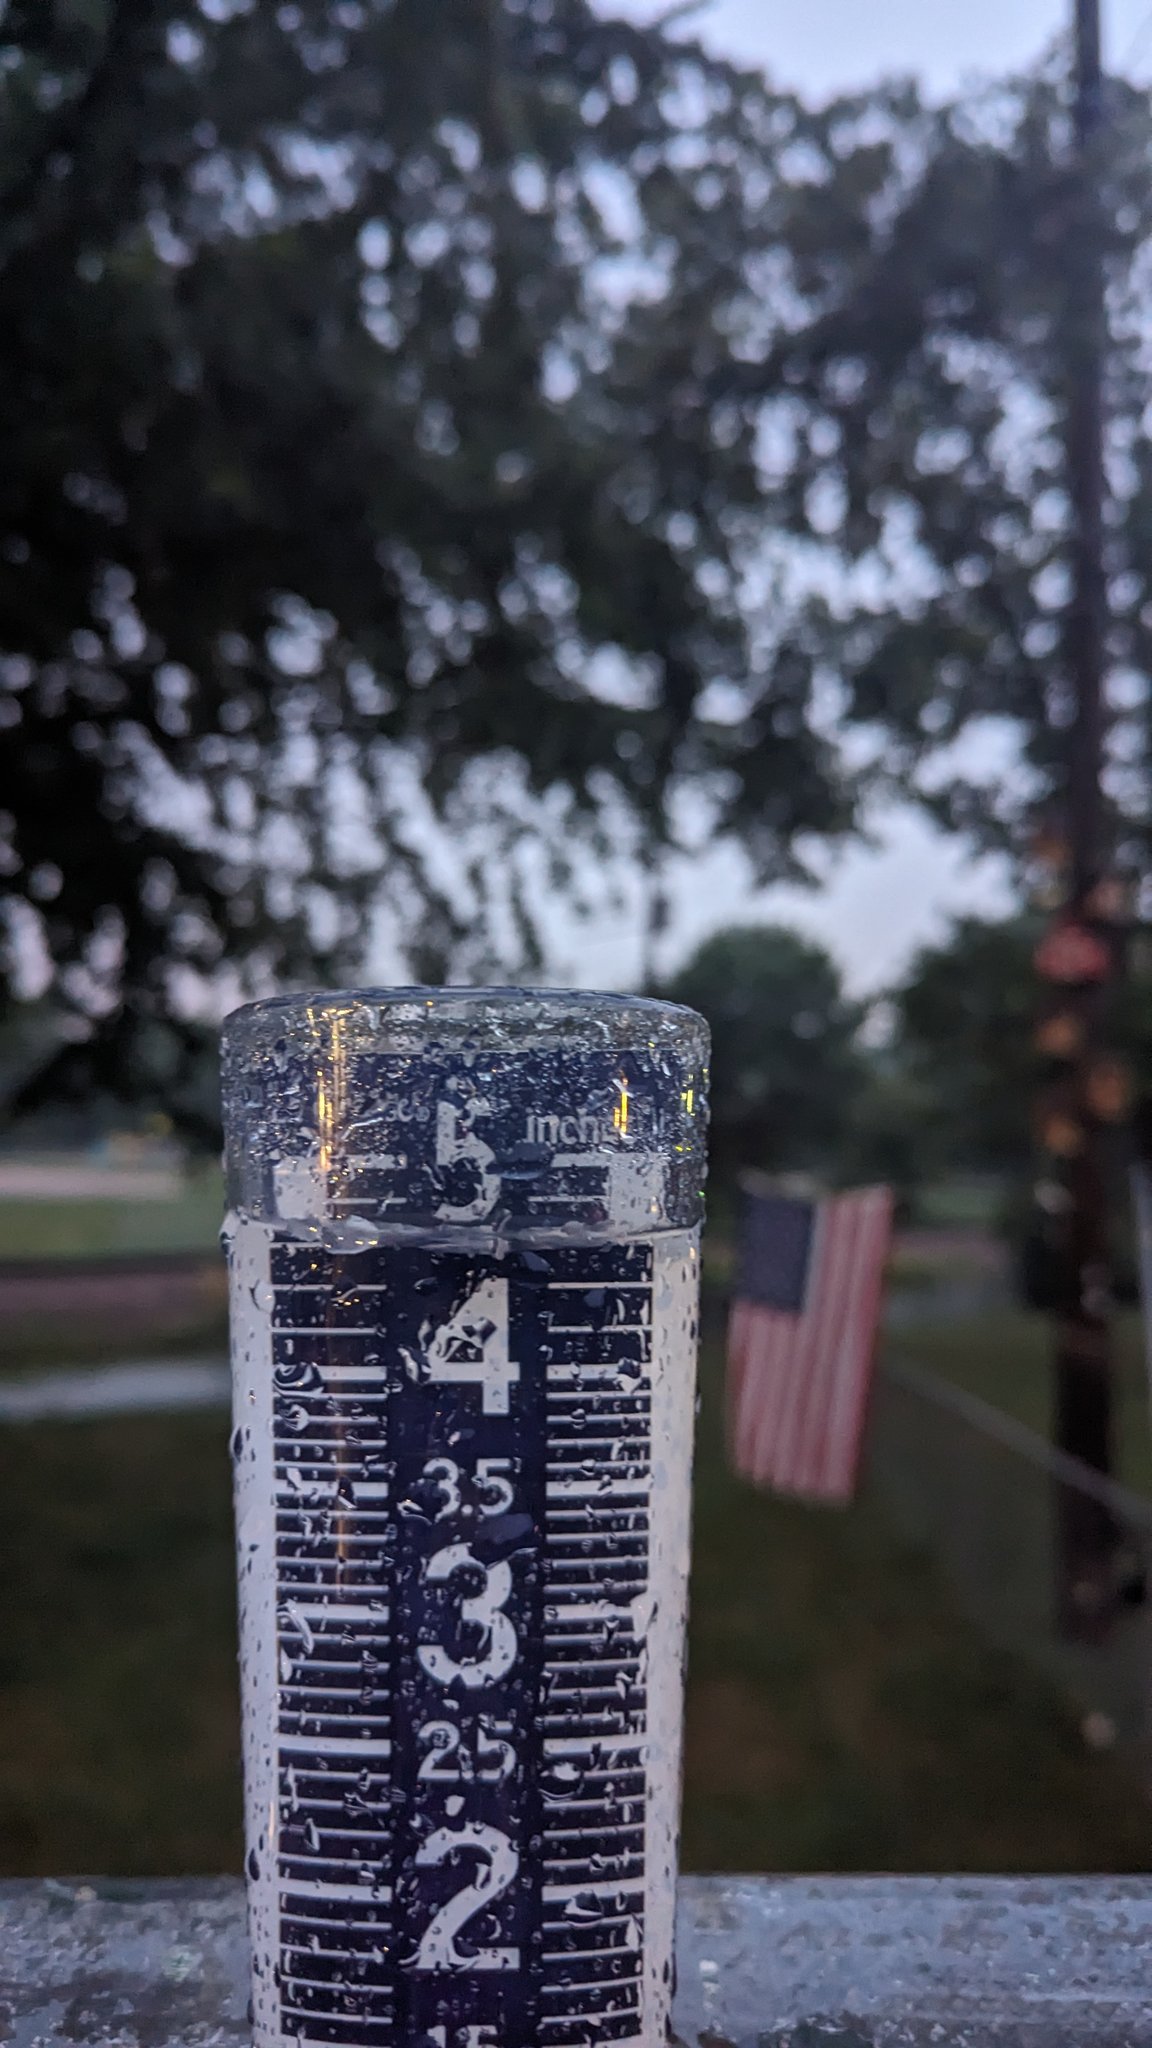 Rain gauge showing between 4 and 5 inches of rainfall.